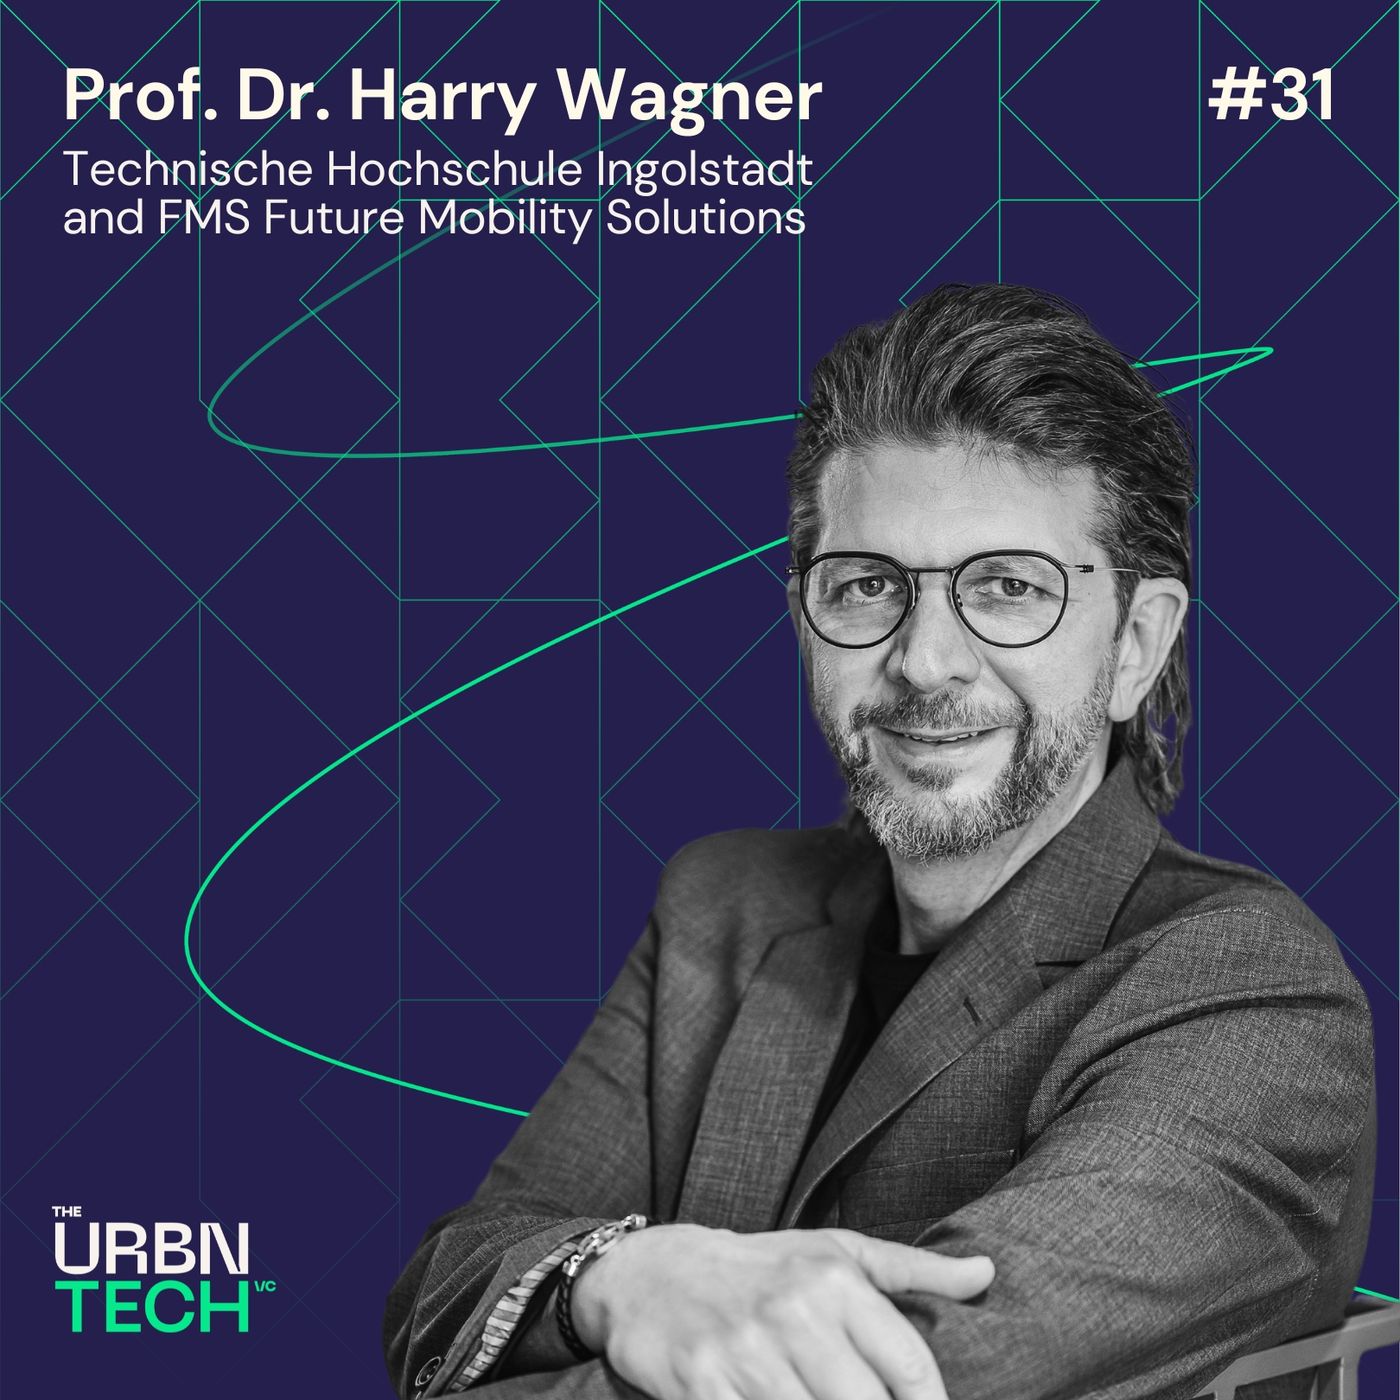 #31 The Future of Urban Mobility is Intermodal – an Expert’s View with Harry Wagner, Technische Hochschule Ingolstadt & FMS